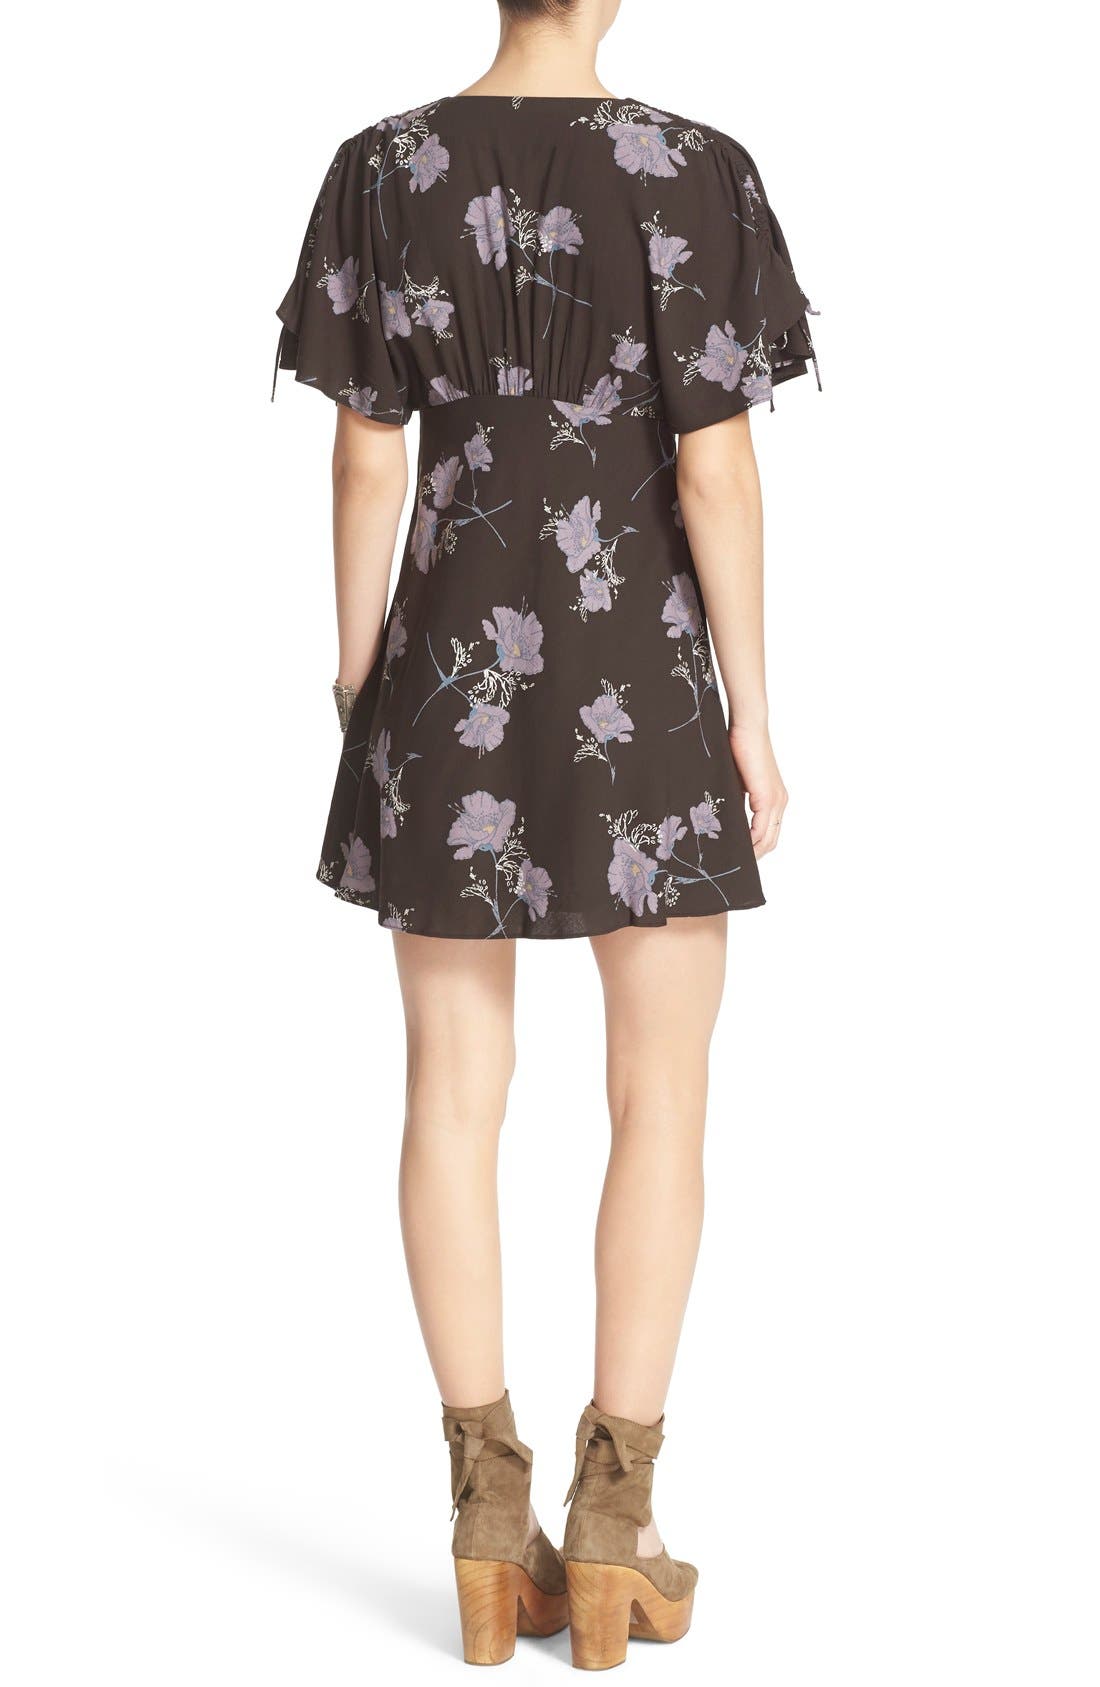 Free People 'Melanie' Floral Print Fit & Flare Dress Night Combo 0